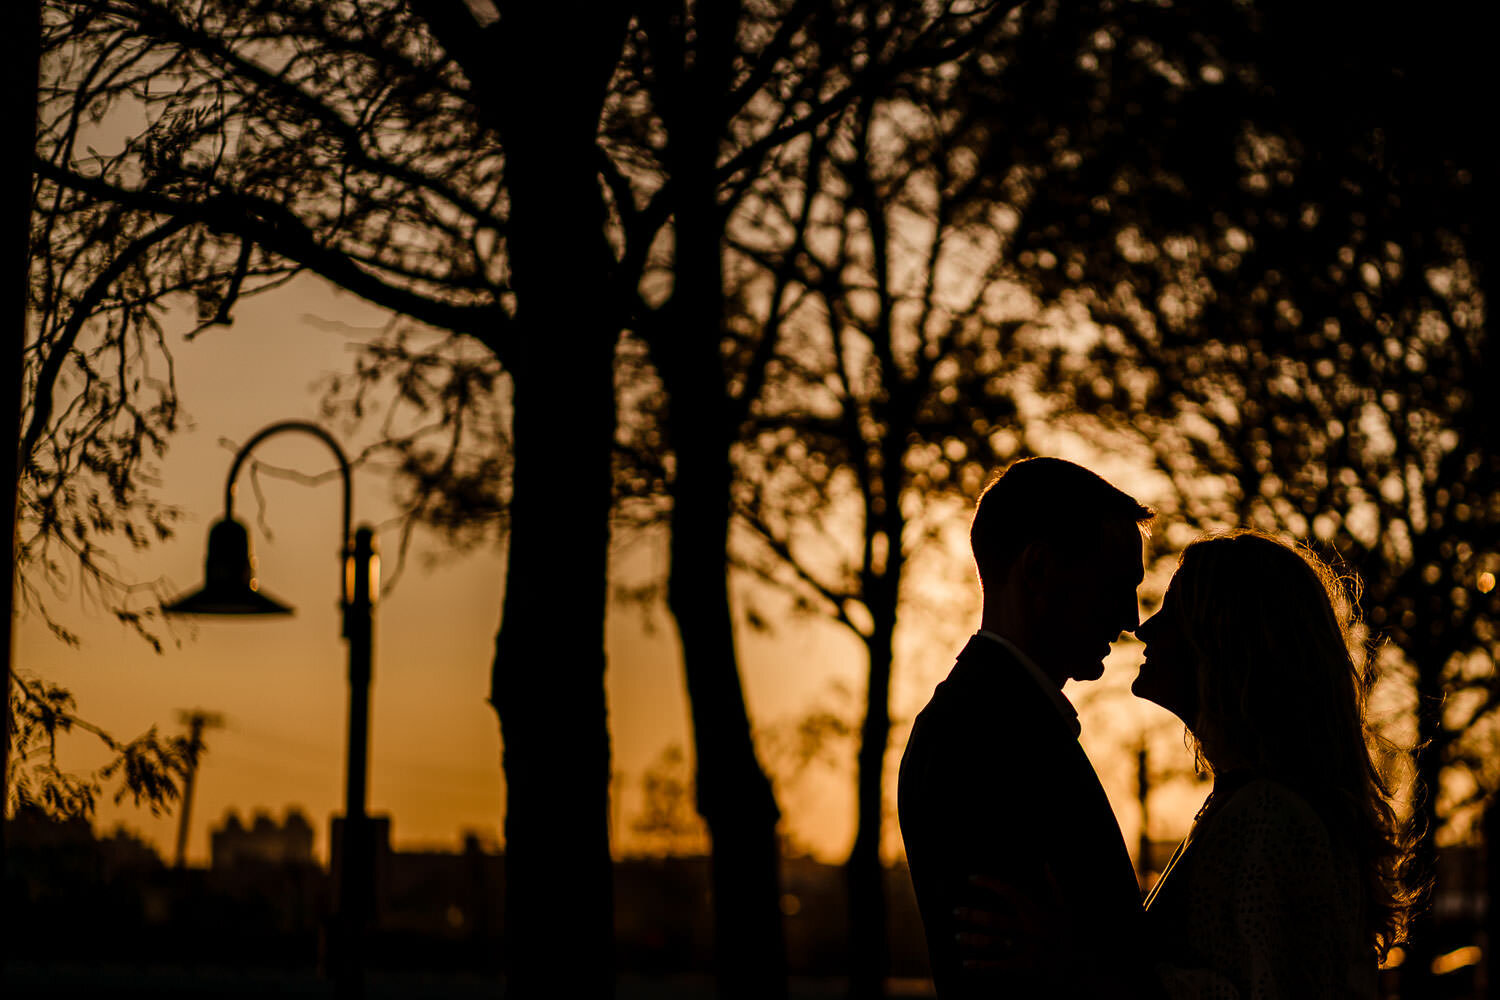 Couple's silhouette portrait at sunset at Hoboken train station